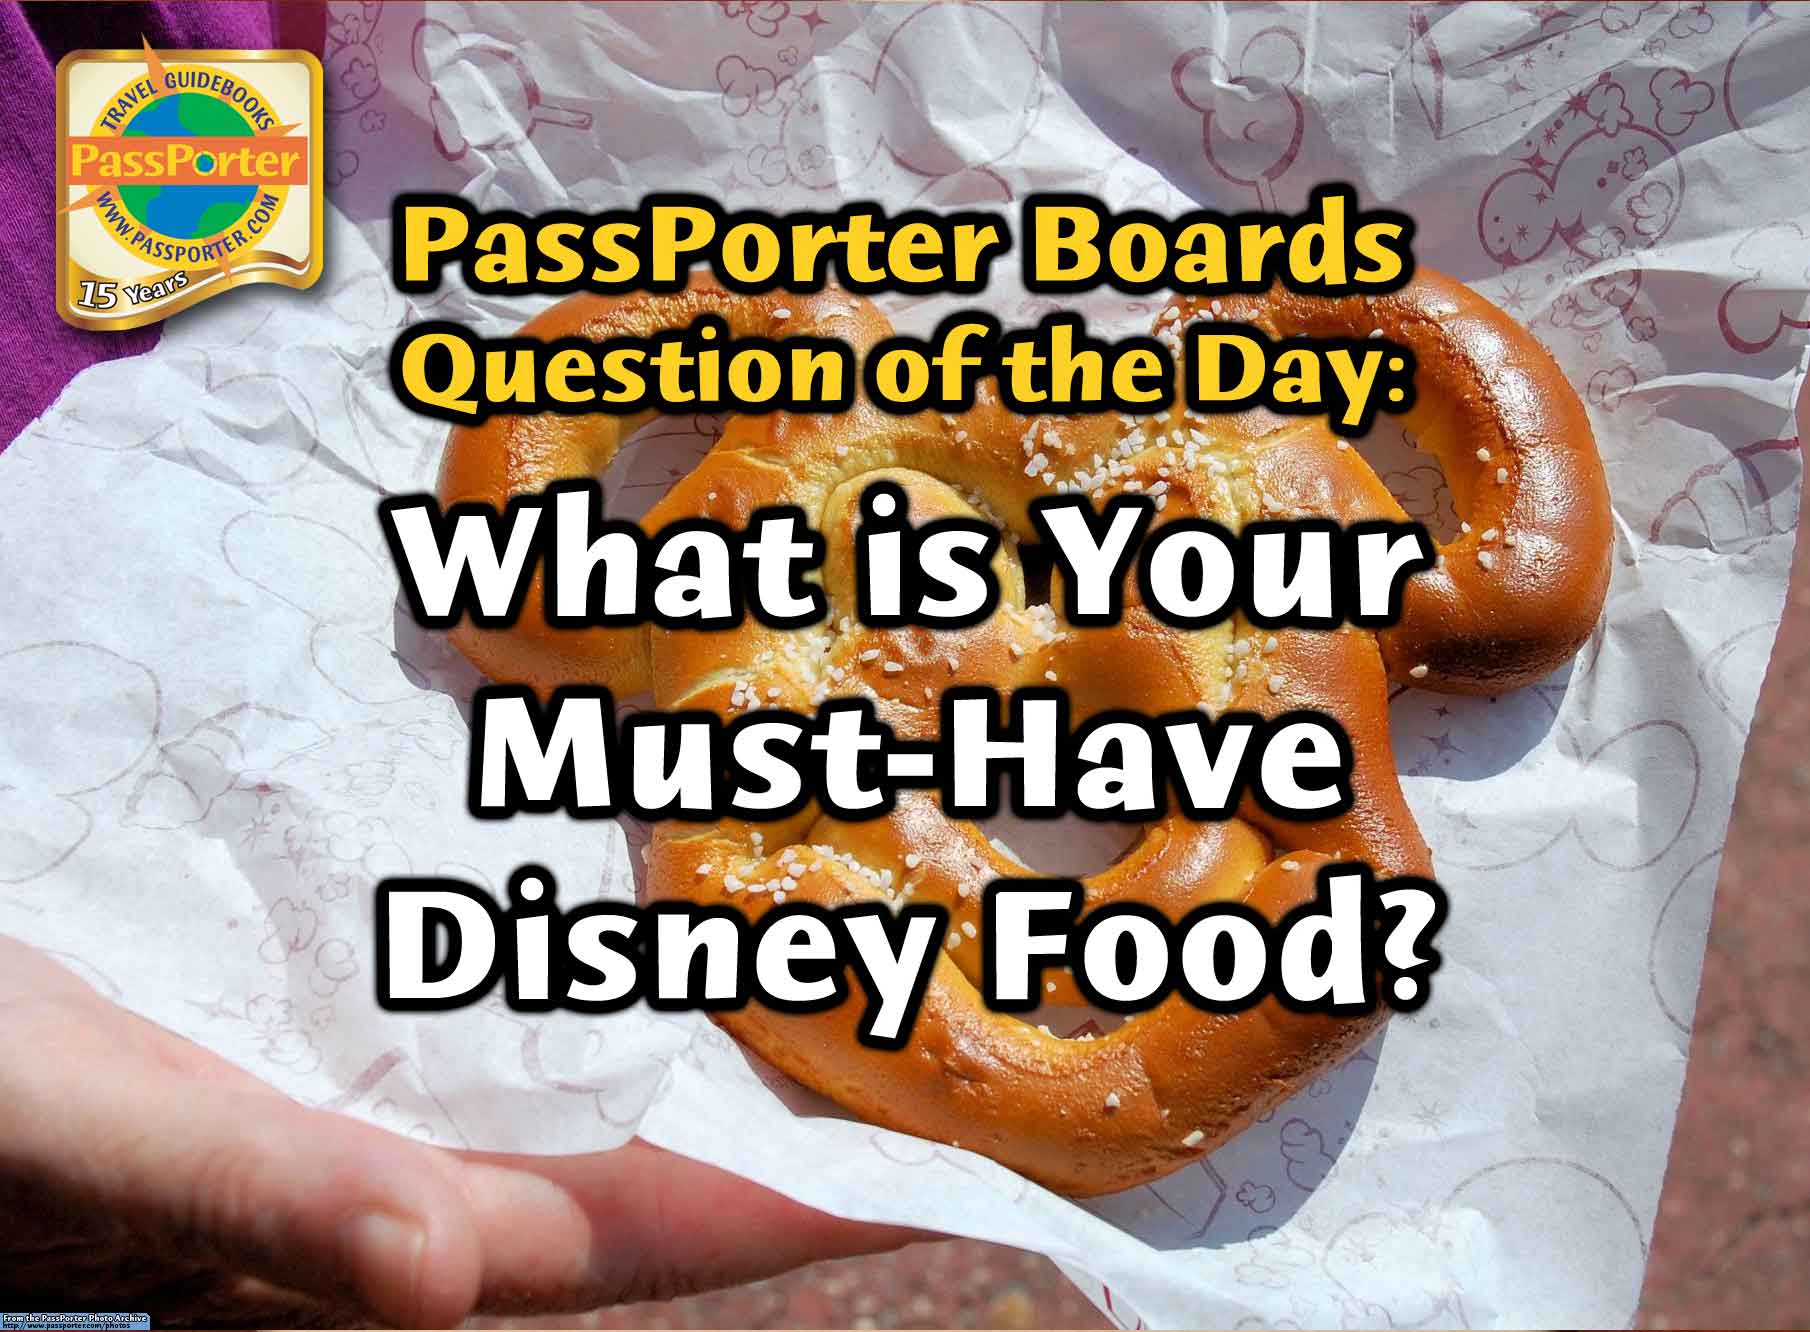 What is Your Must-Have Disney Food?